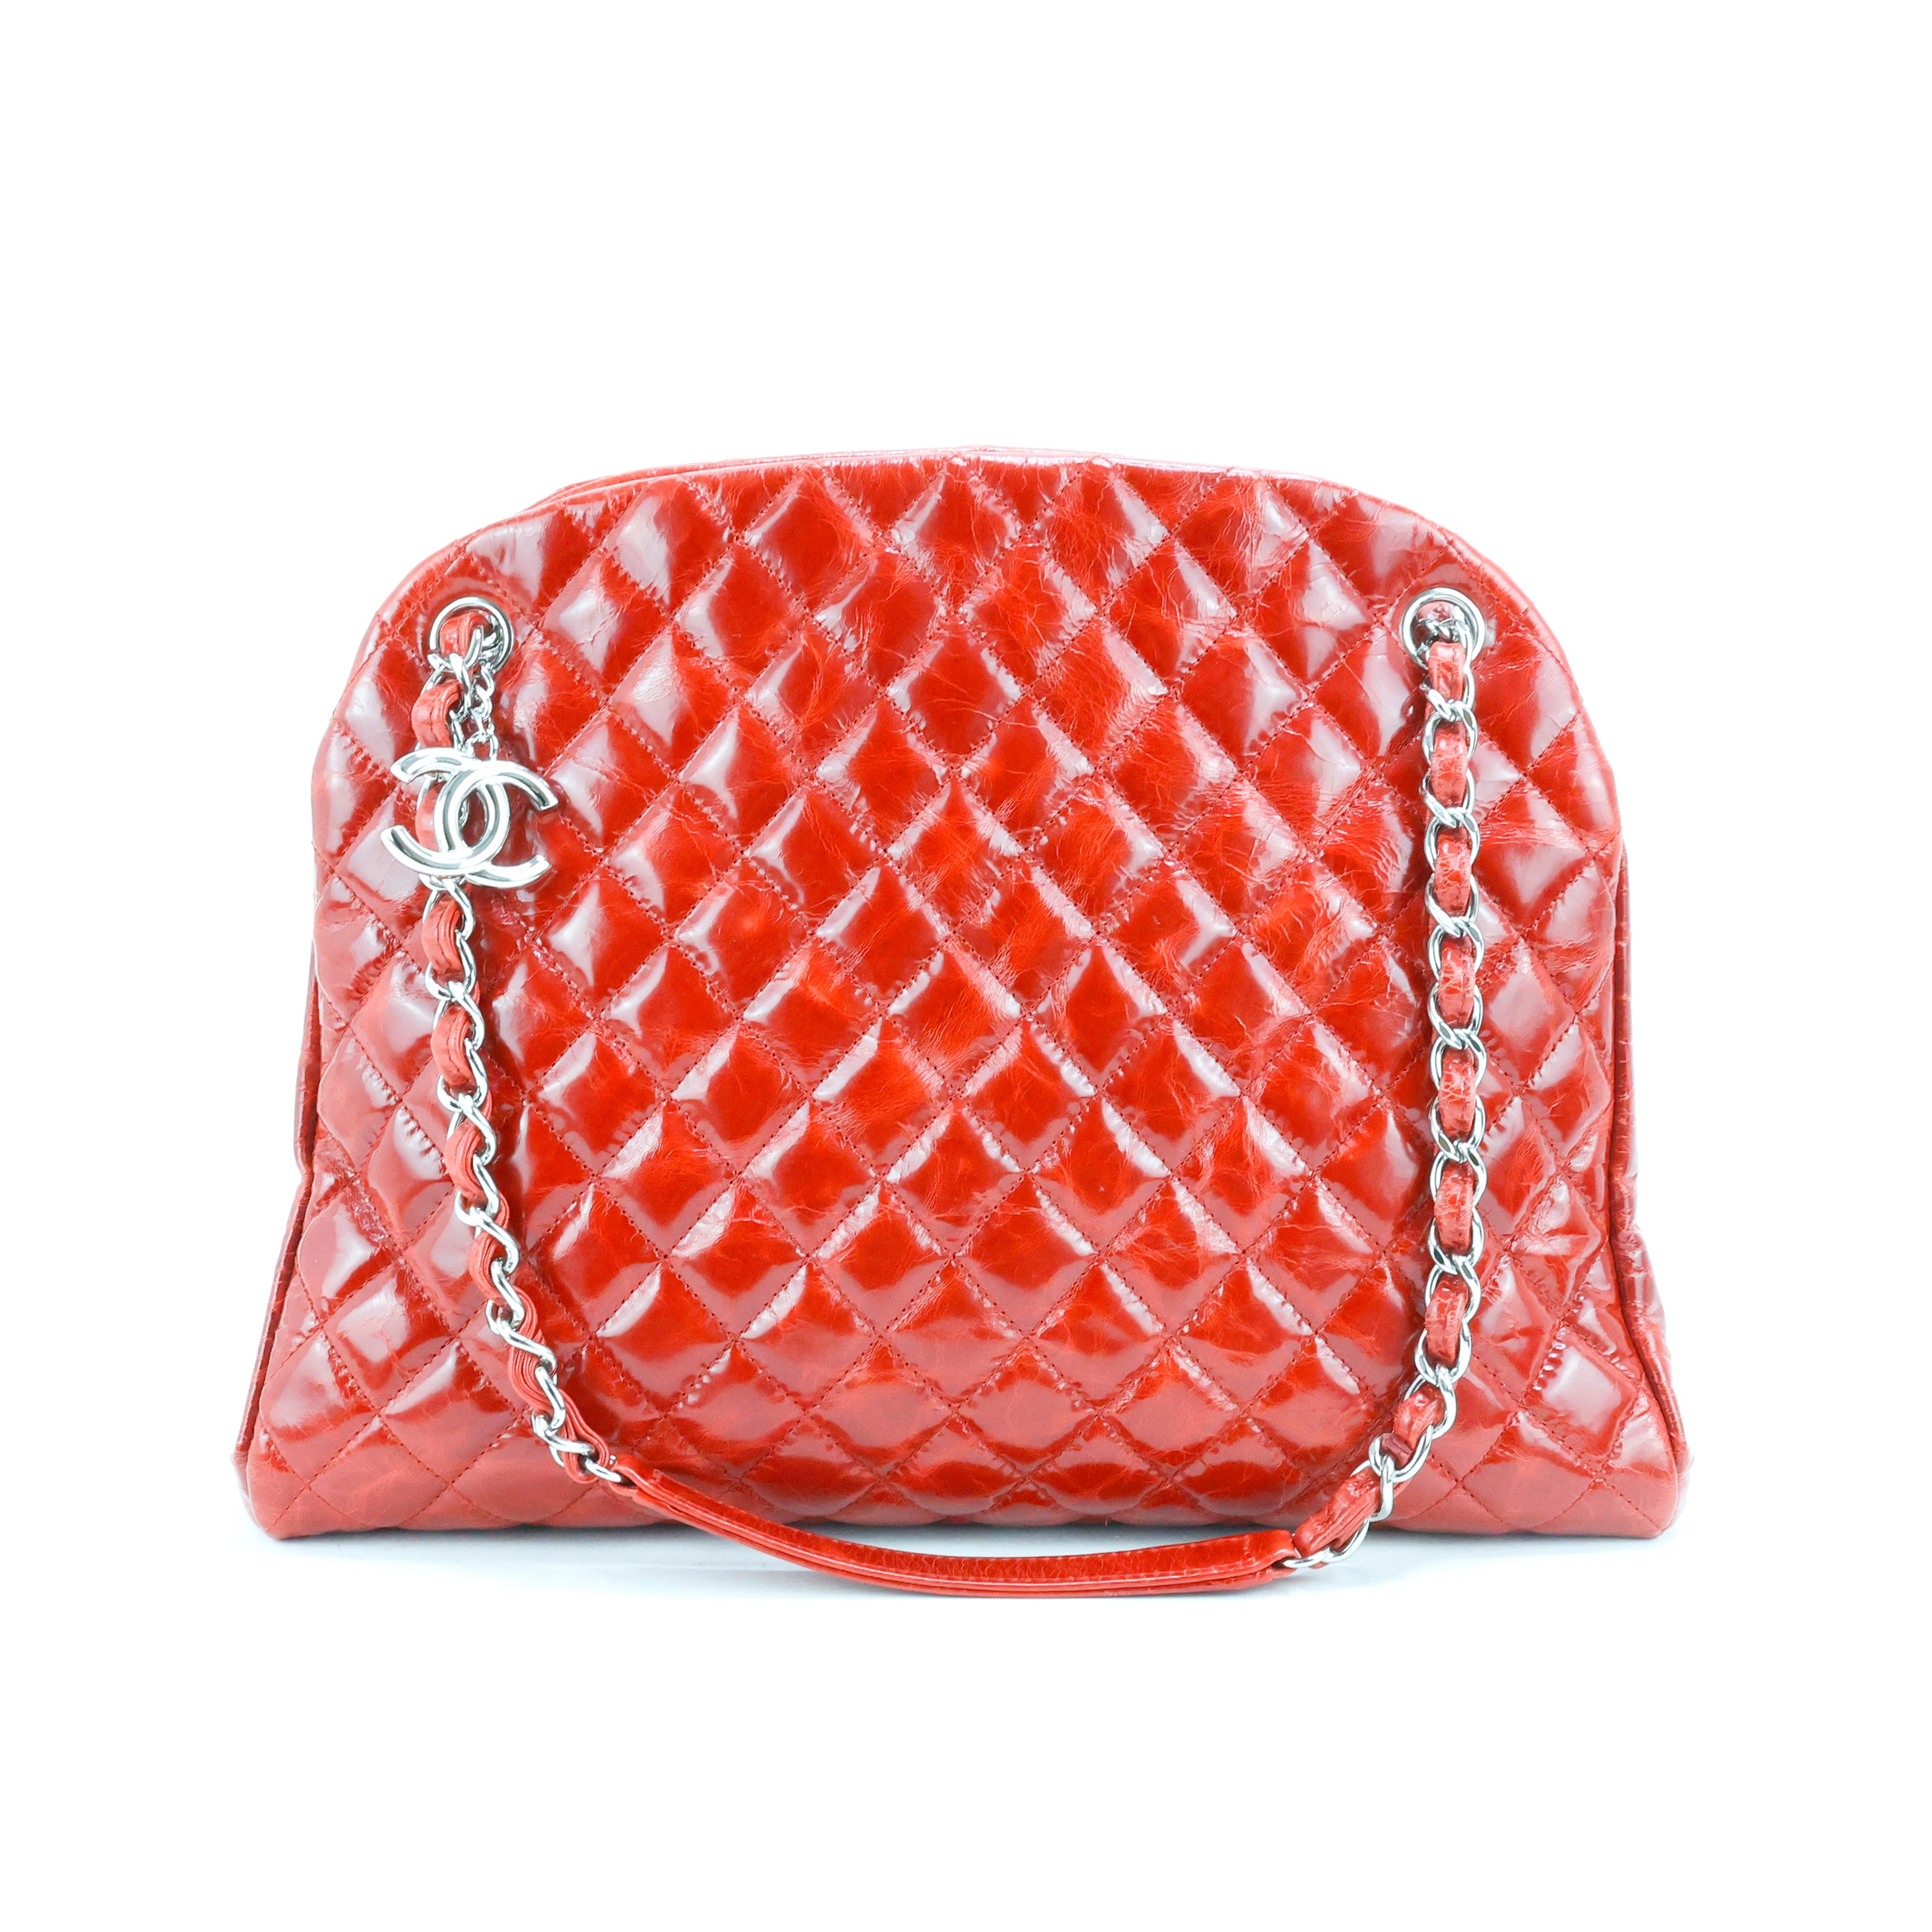 Red Chanel Bag in red quilted leather For Sale